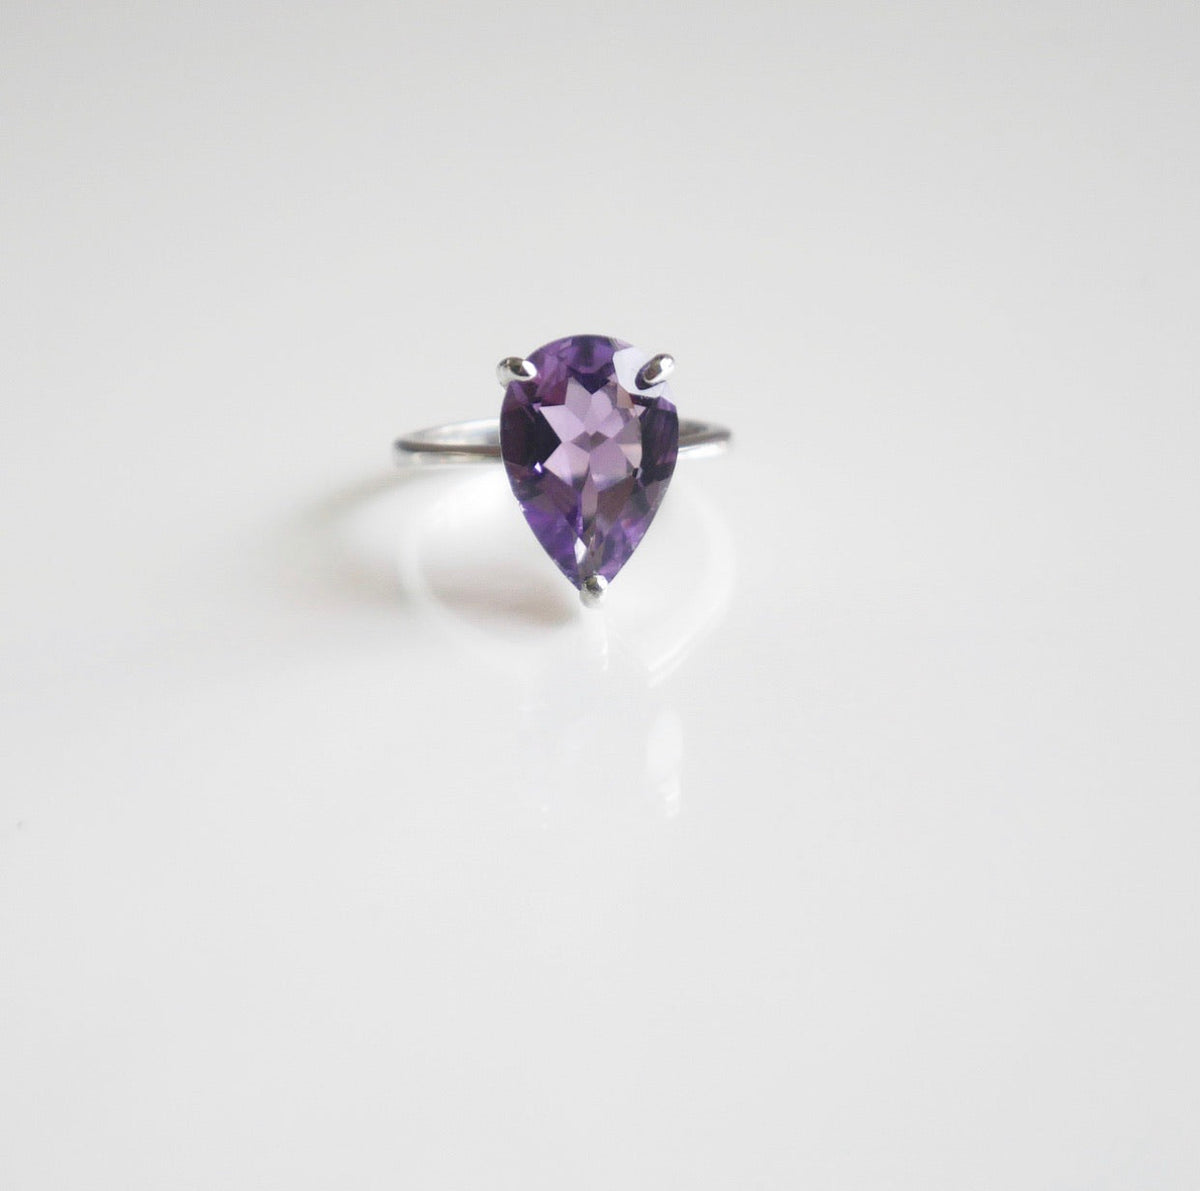 Amethyst ring white gold sterling silver amethyst ring. February gemstone ring. Purple ring. chakra ring. good luck ring. amethyst crystals. jewelry with crystals. cocktail ring. designer inspired cocktail ring. designer inspired rings. tiffany's inspired ring. engagement ring with gemstone. amethyst engagement ring. wedding rings with amethyst size 6. size 7. size 8 ring. vacation jewelry. Bridesmaids jewelry. Gift ideas . shopping in Miami, Brickell. Kesley Boutique